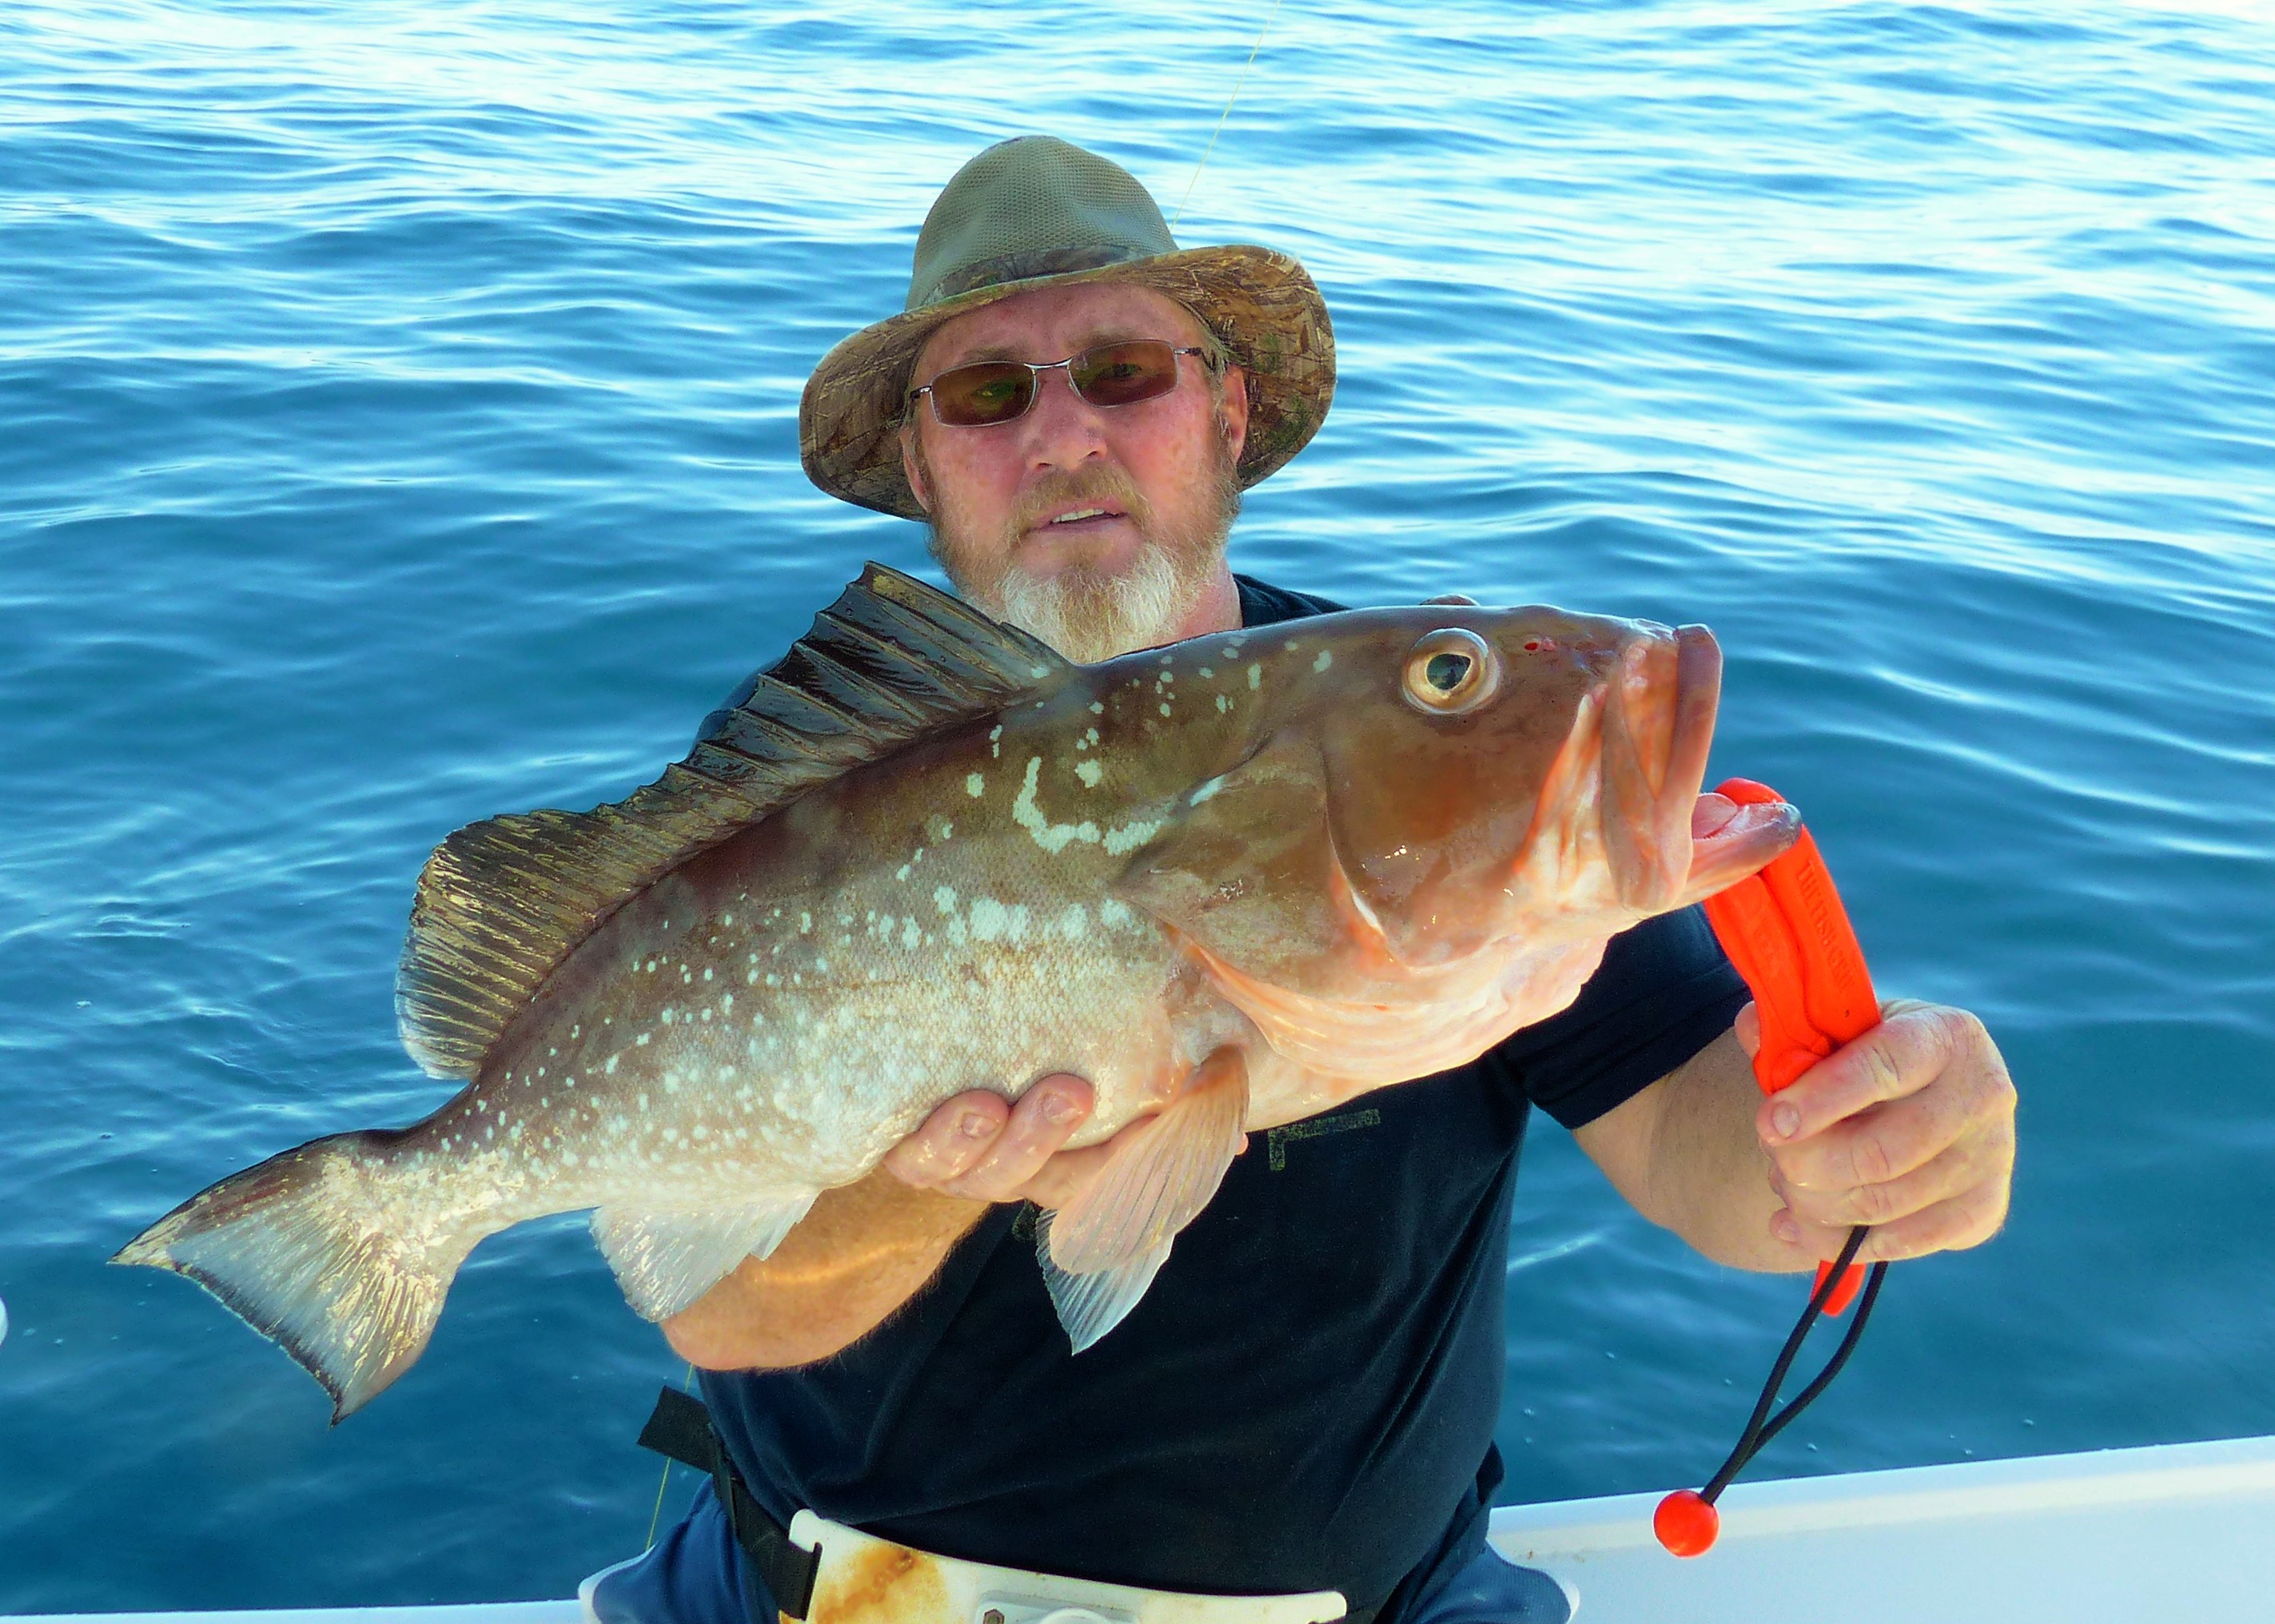 Shipwreck Fishing in Southwest Florida – Red Grouper and Snapper Fun